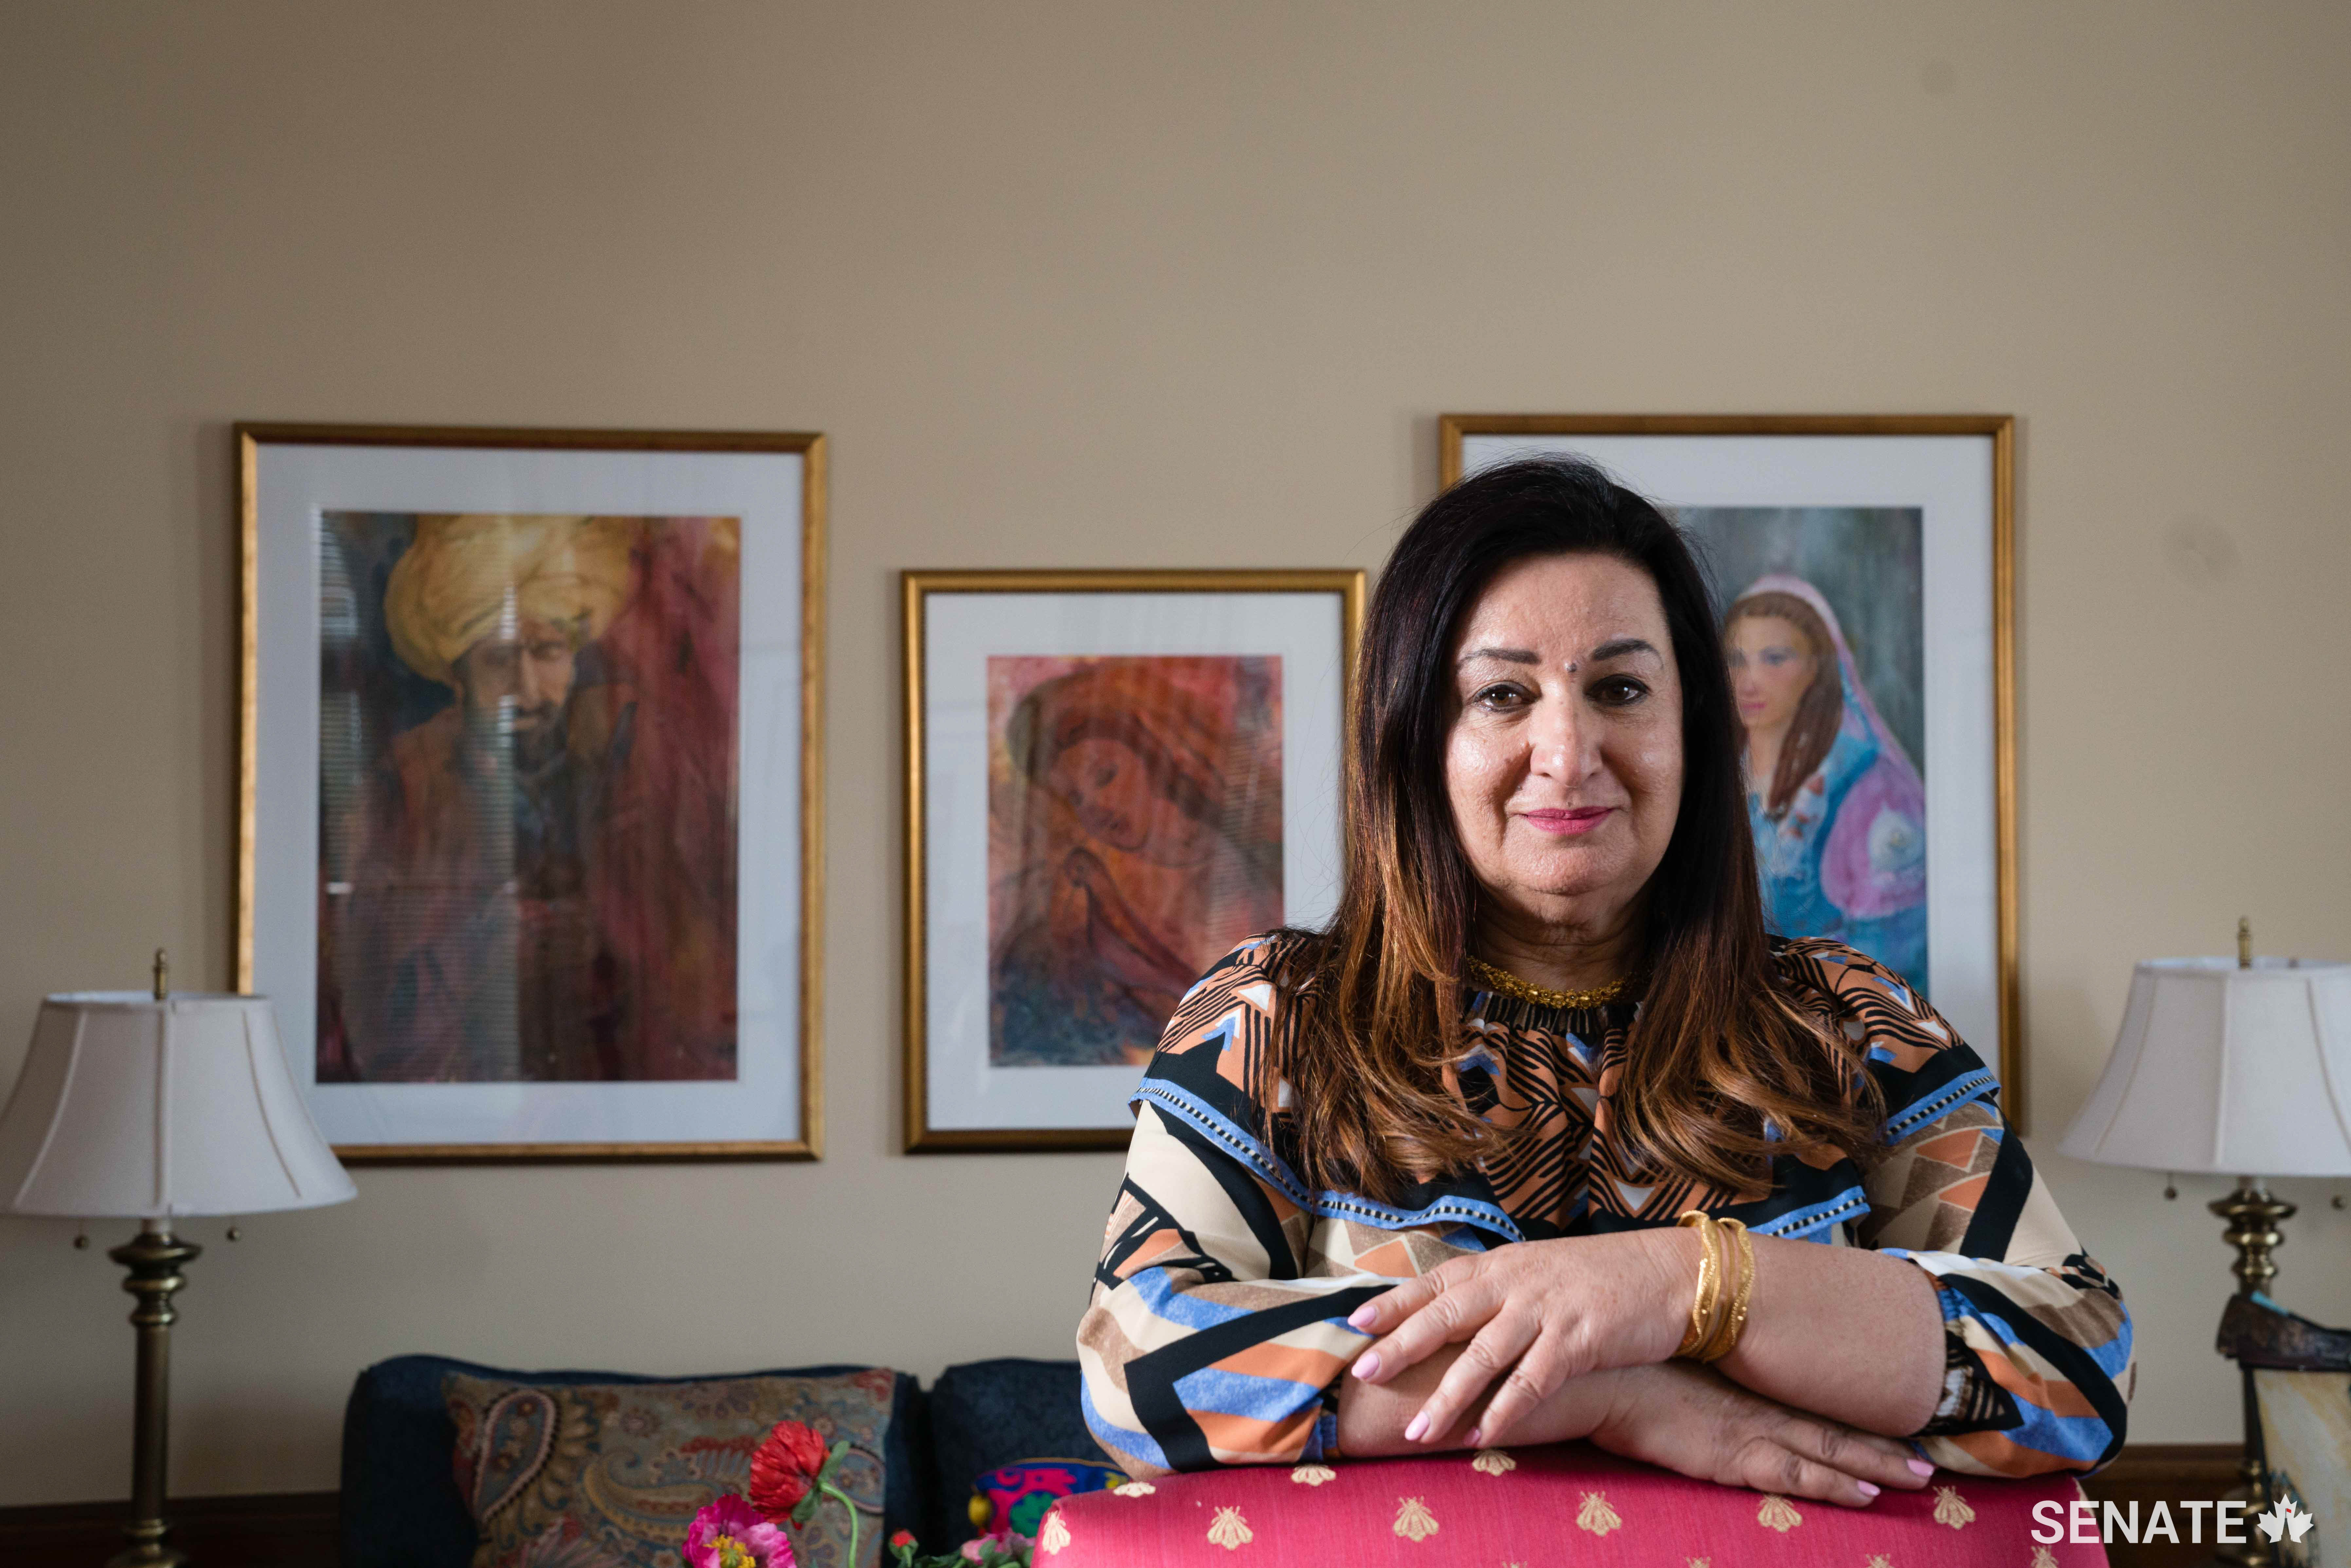 Senator Salma Ataullahjan paints scenes inspired by her travels and by Pakistani literature. Several of her finished works hang in her East Block office.